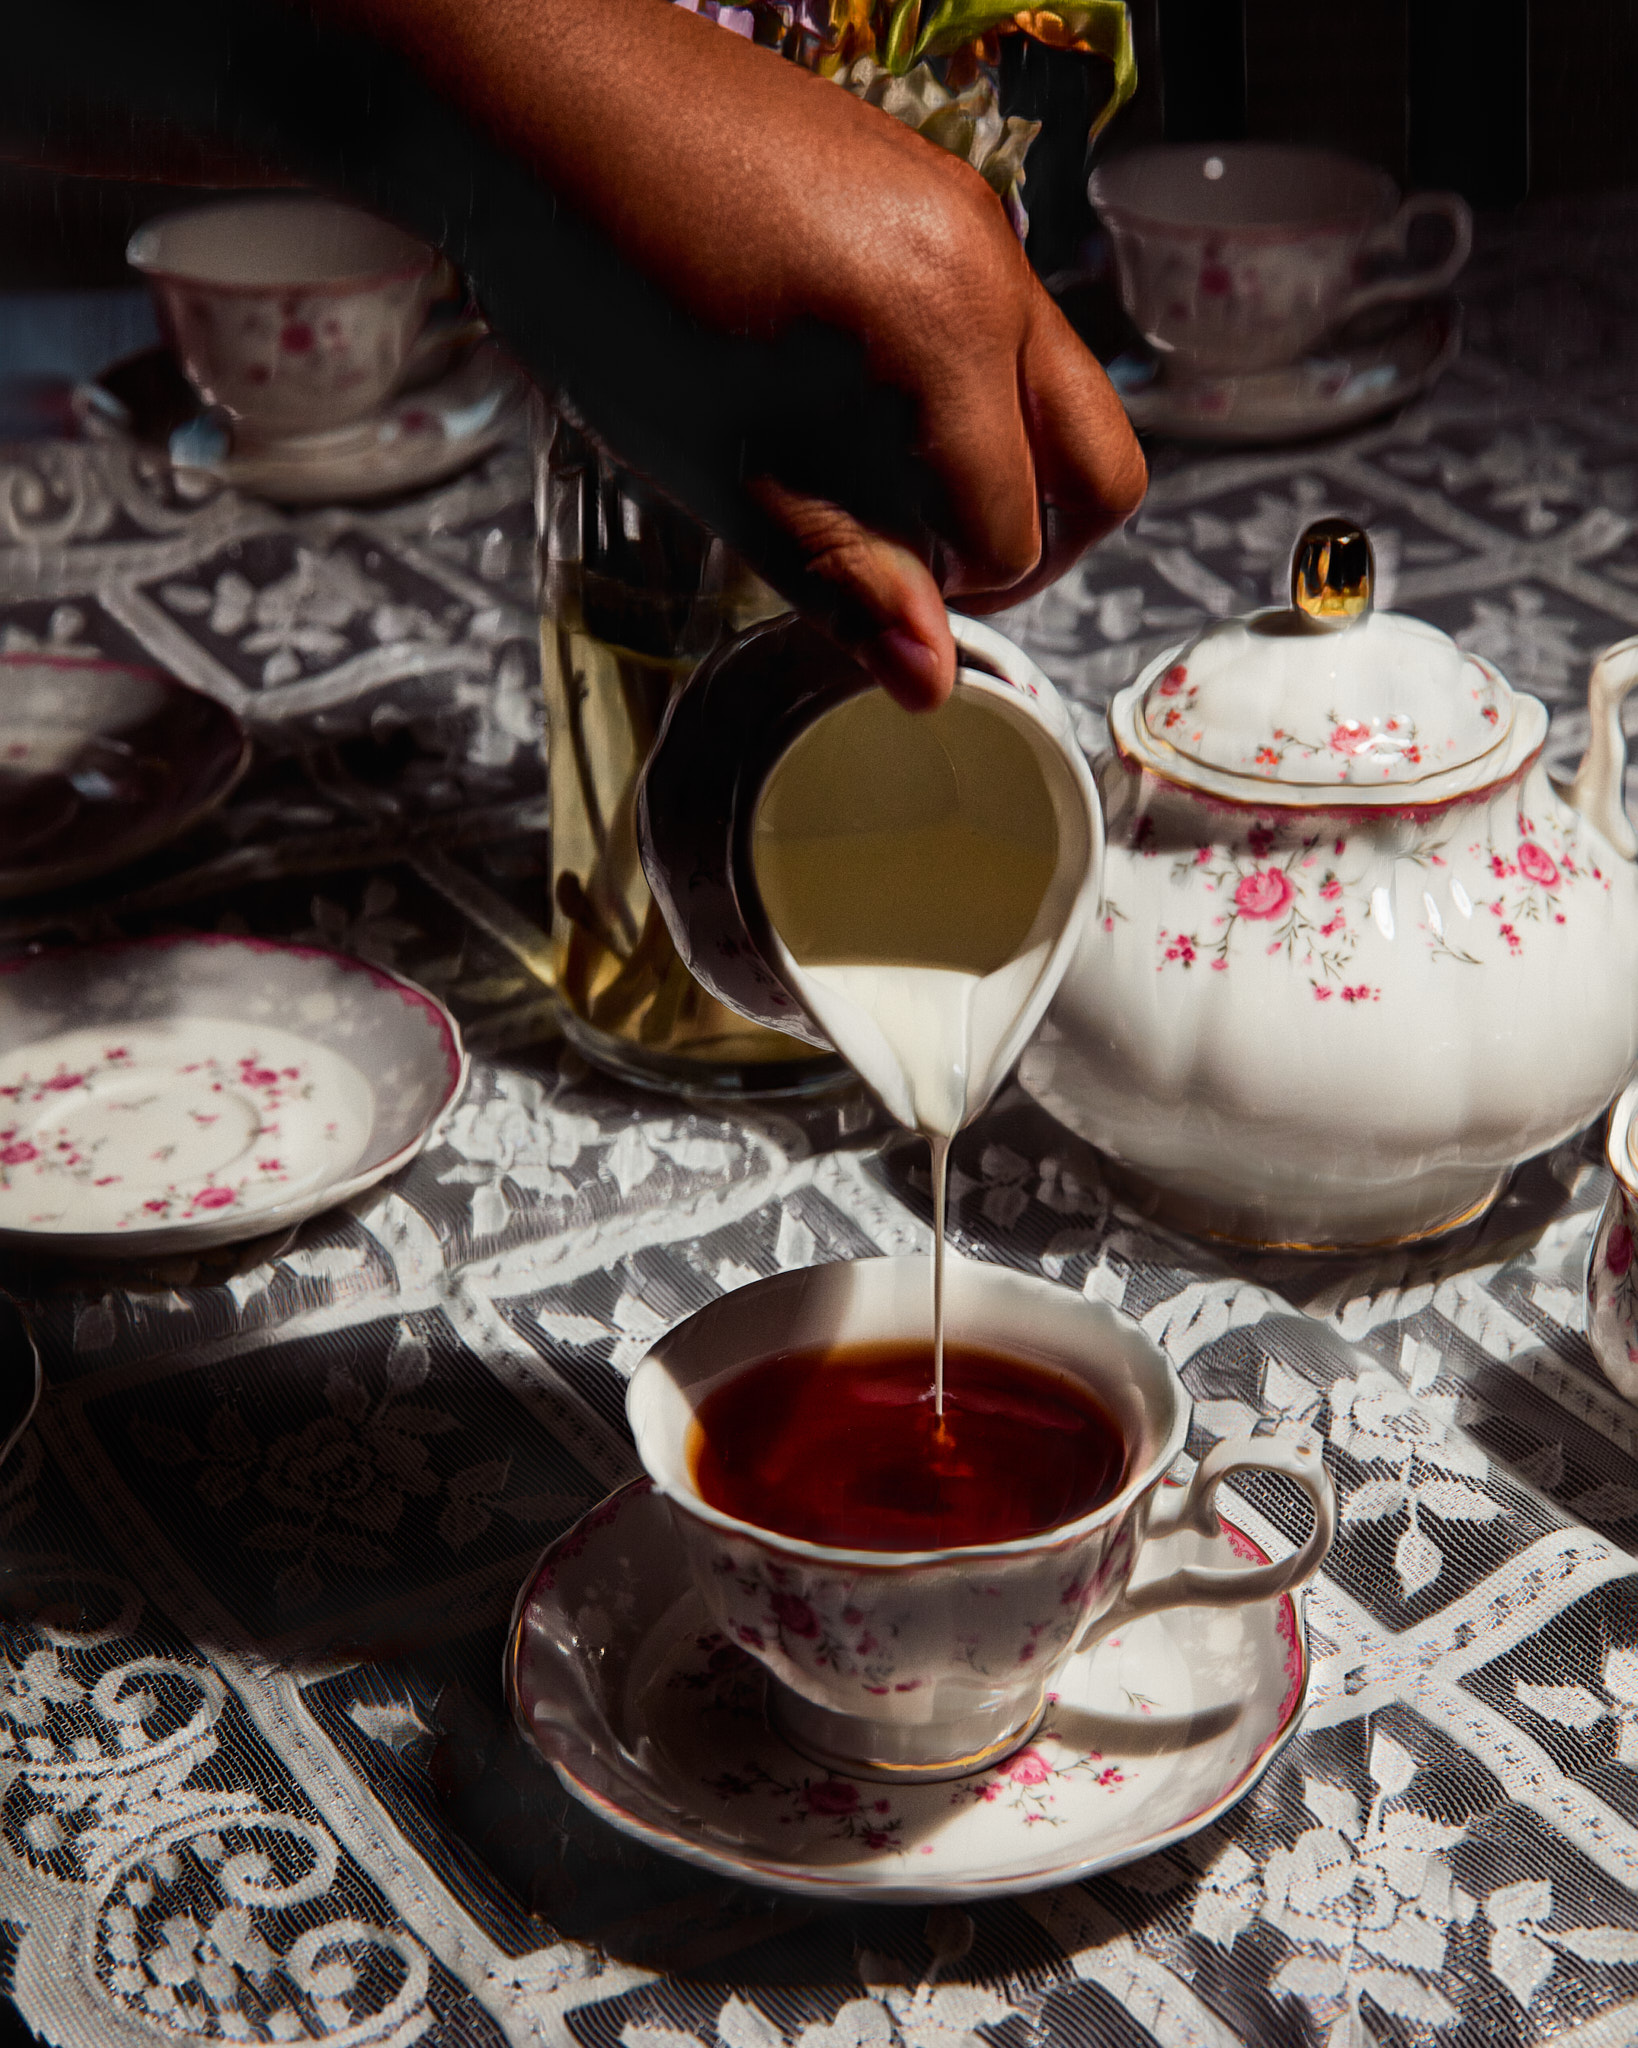 A hand pouring milk into a cup of tea from a creamer on a table set with floral teacups and a teapot.